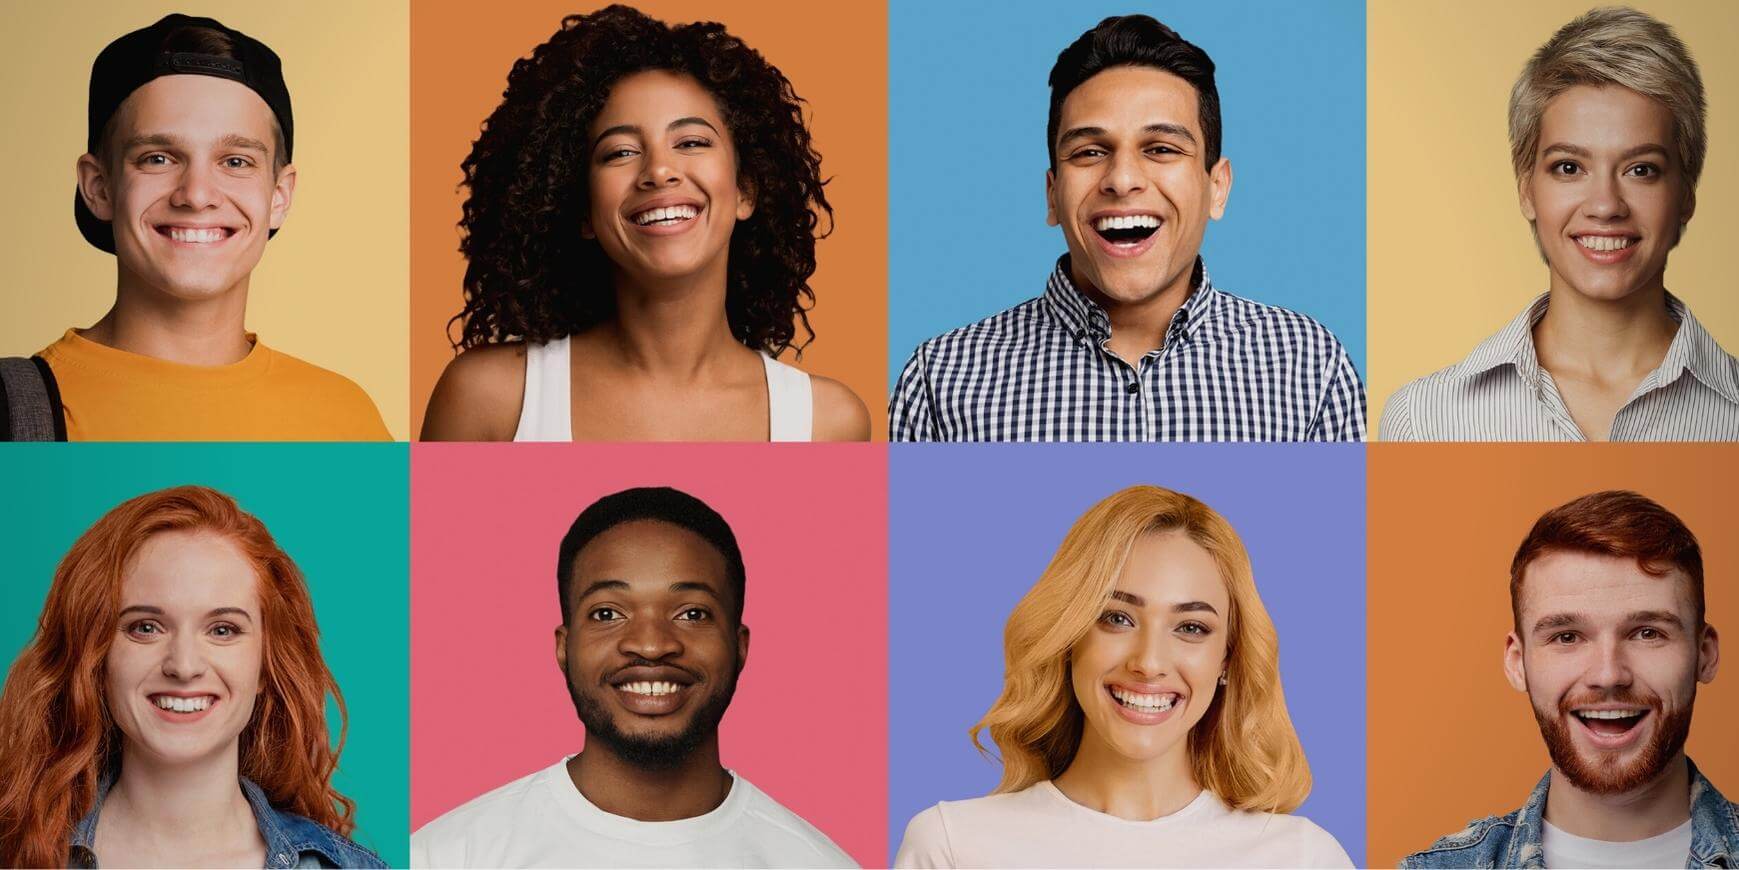 Faces of different types of buyer personas